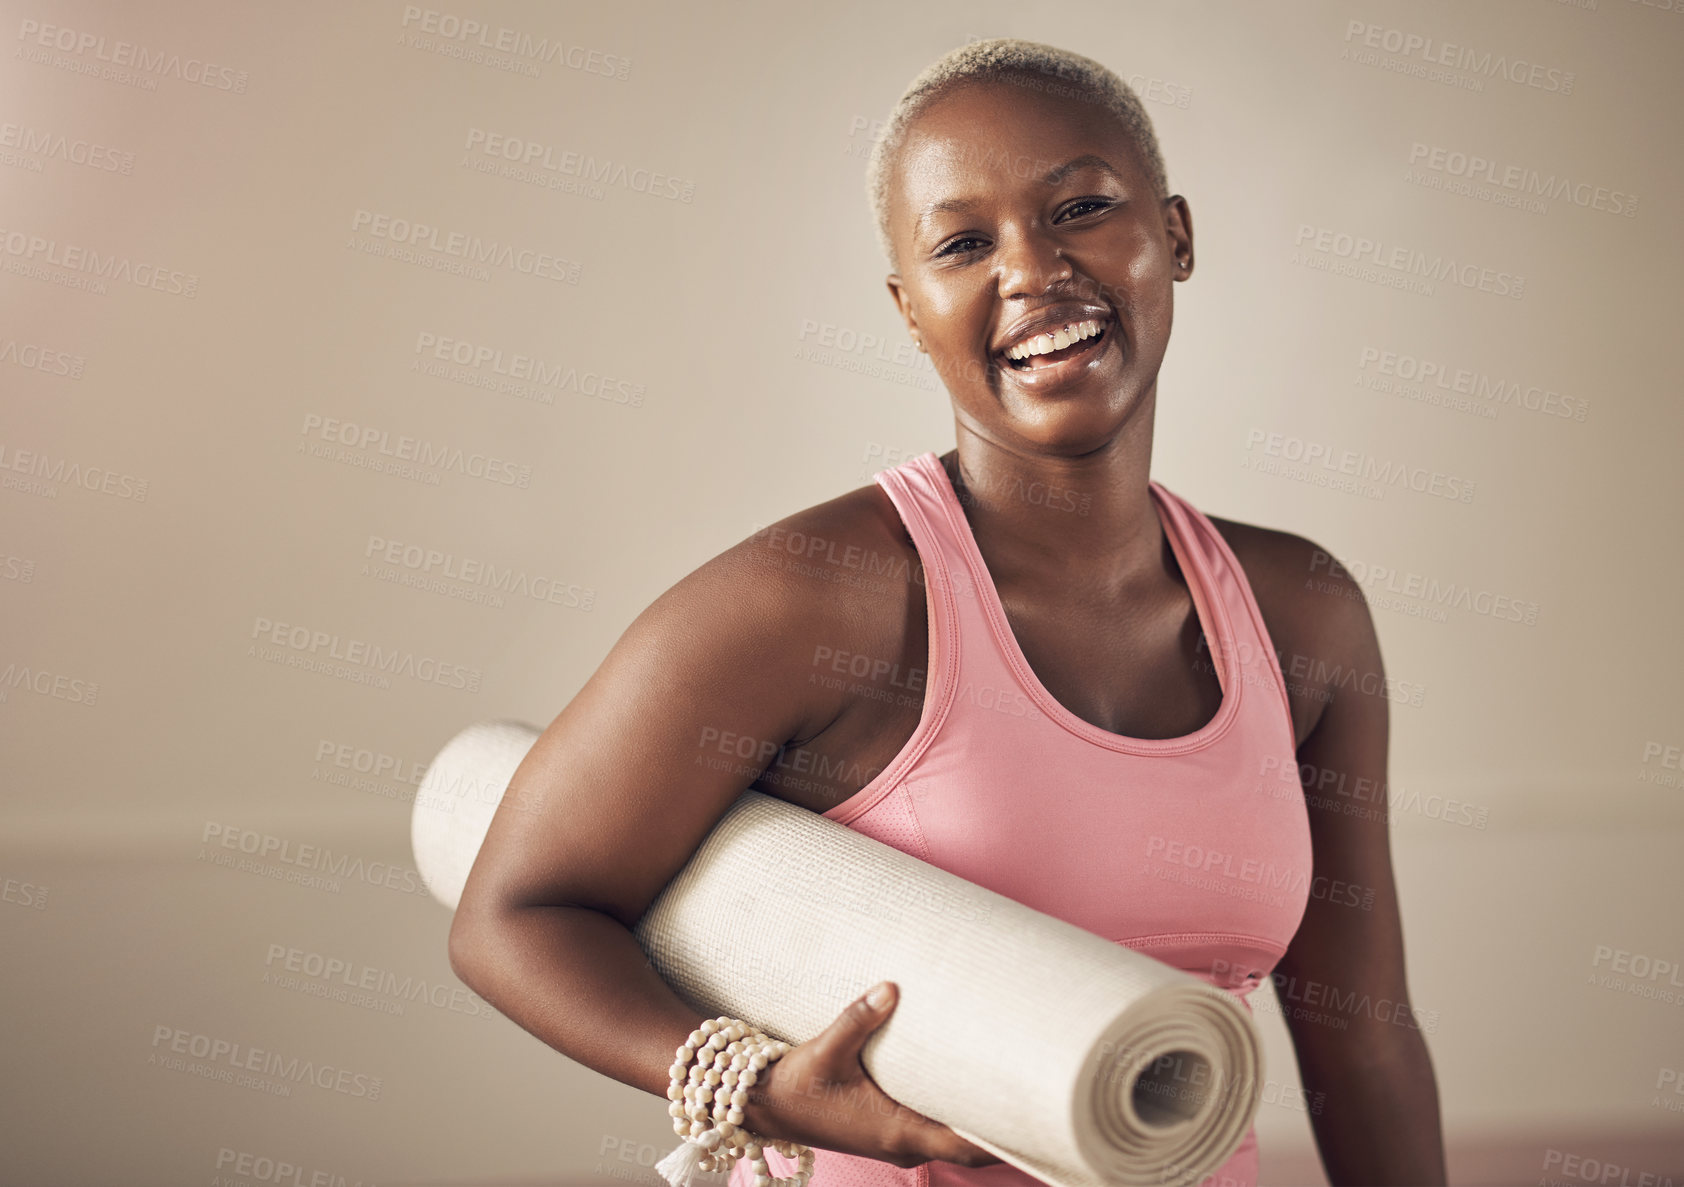 Buy stock photo Cropped portrait of an attractive young woman standing alone and holding her yoga mat before an indoor yoga session